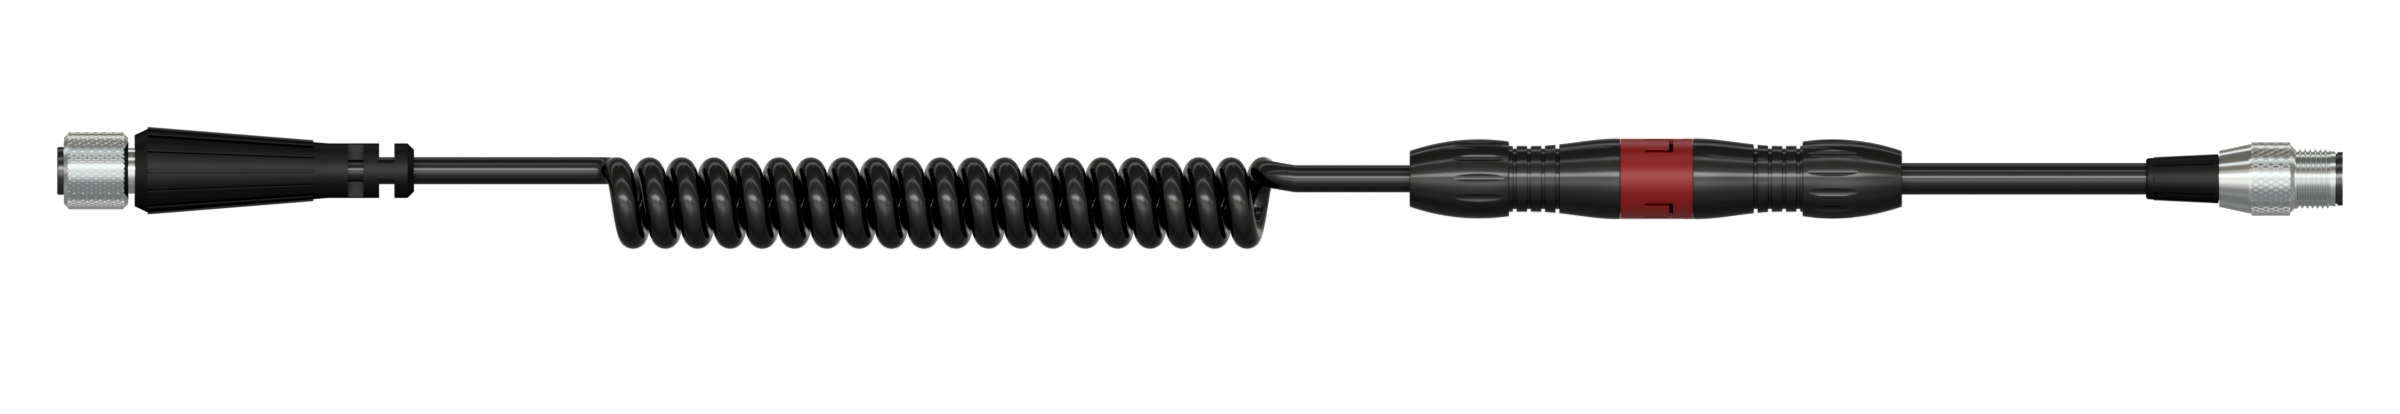 Render of a CTC Industrial Cable and Connector Assembly featuring CB117 coiled cable, J4C Connector, C650 data collector connector, and SFT safety feature